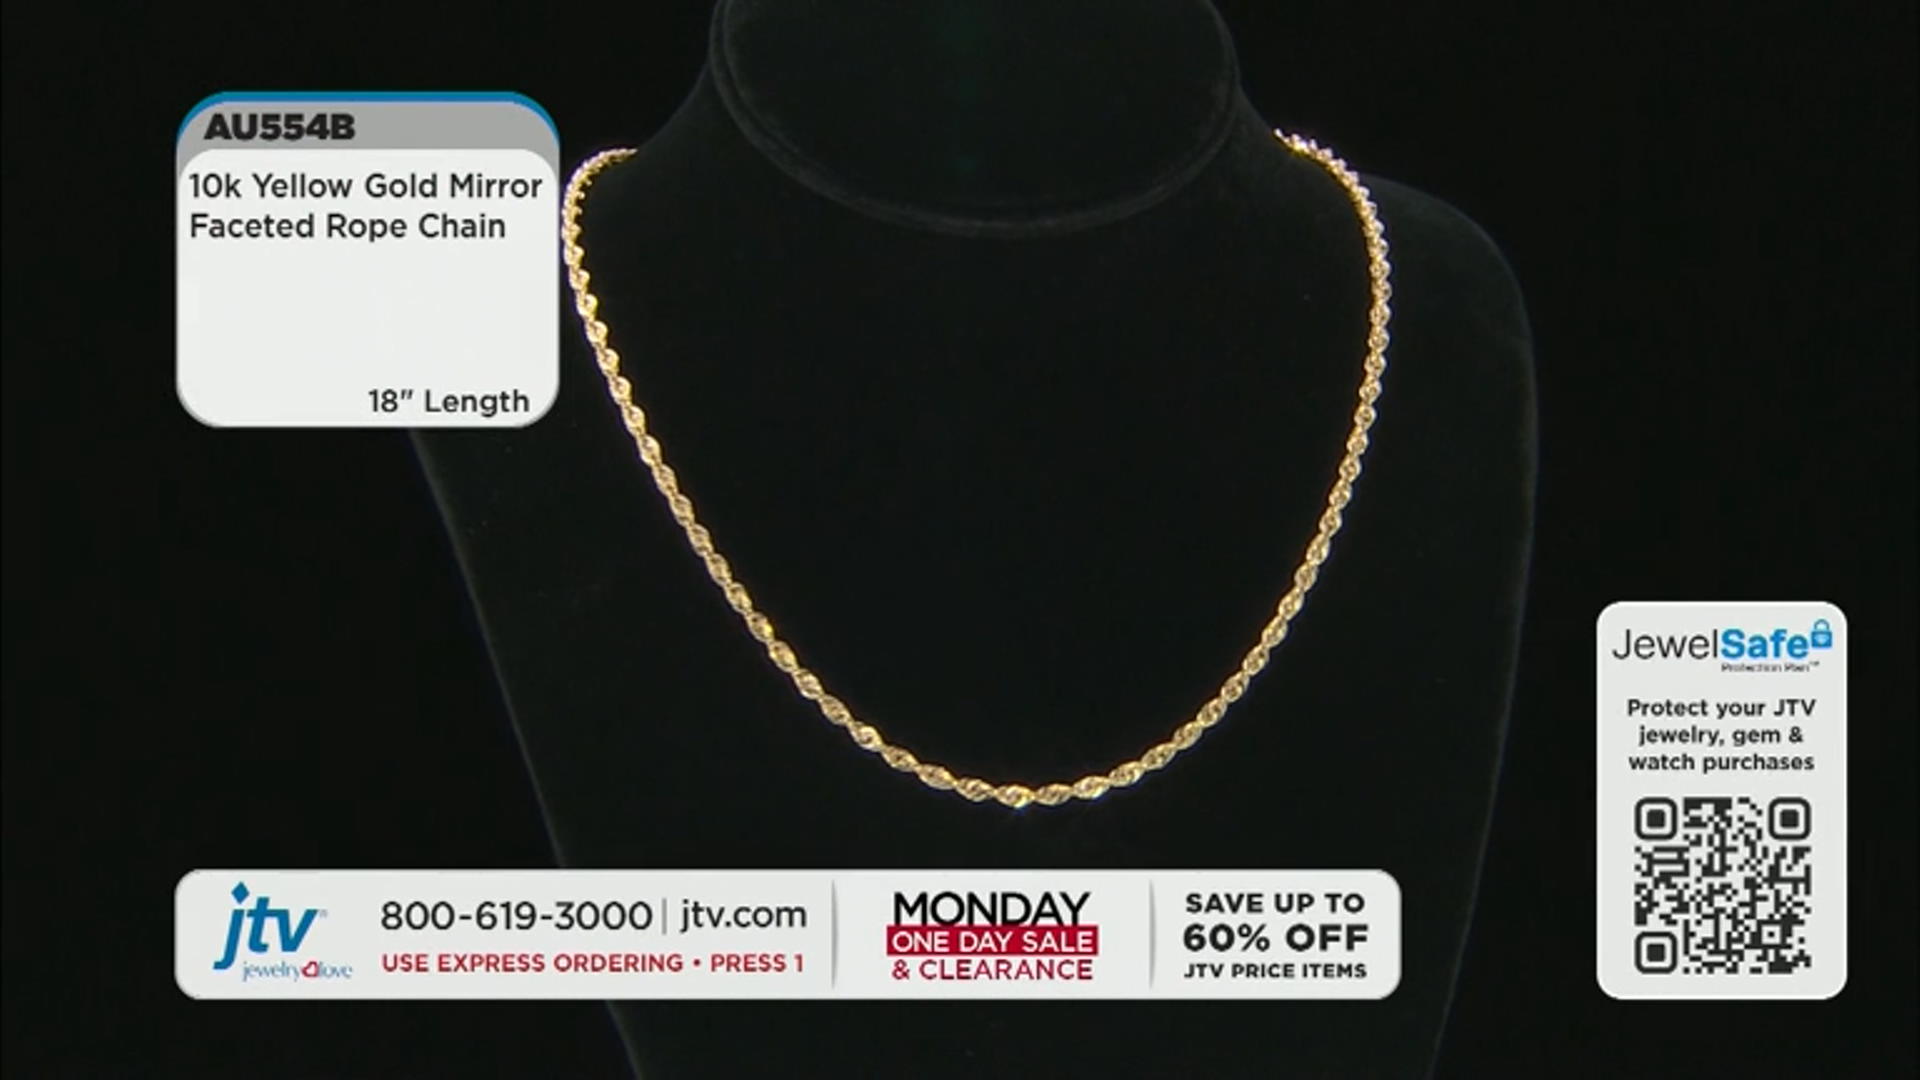 10K Yellow Gold 3.2mm Mirror Faceted Rope Chain Video Thumbnail